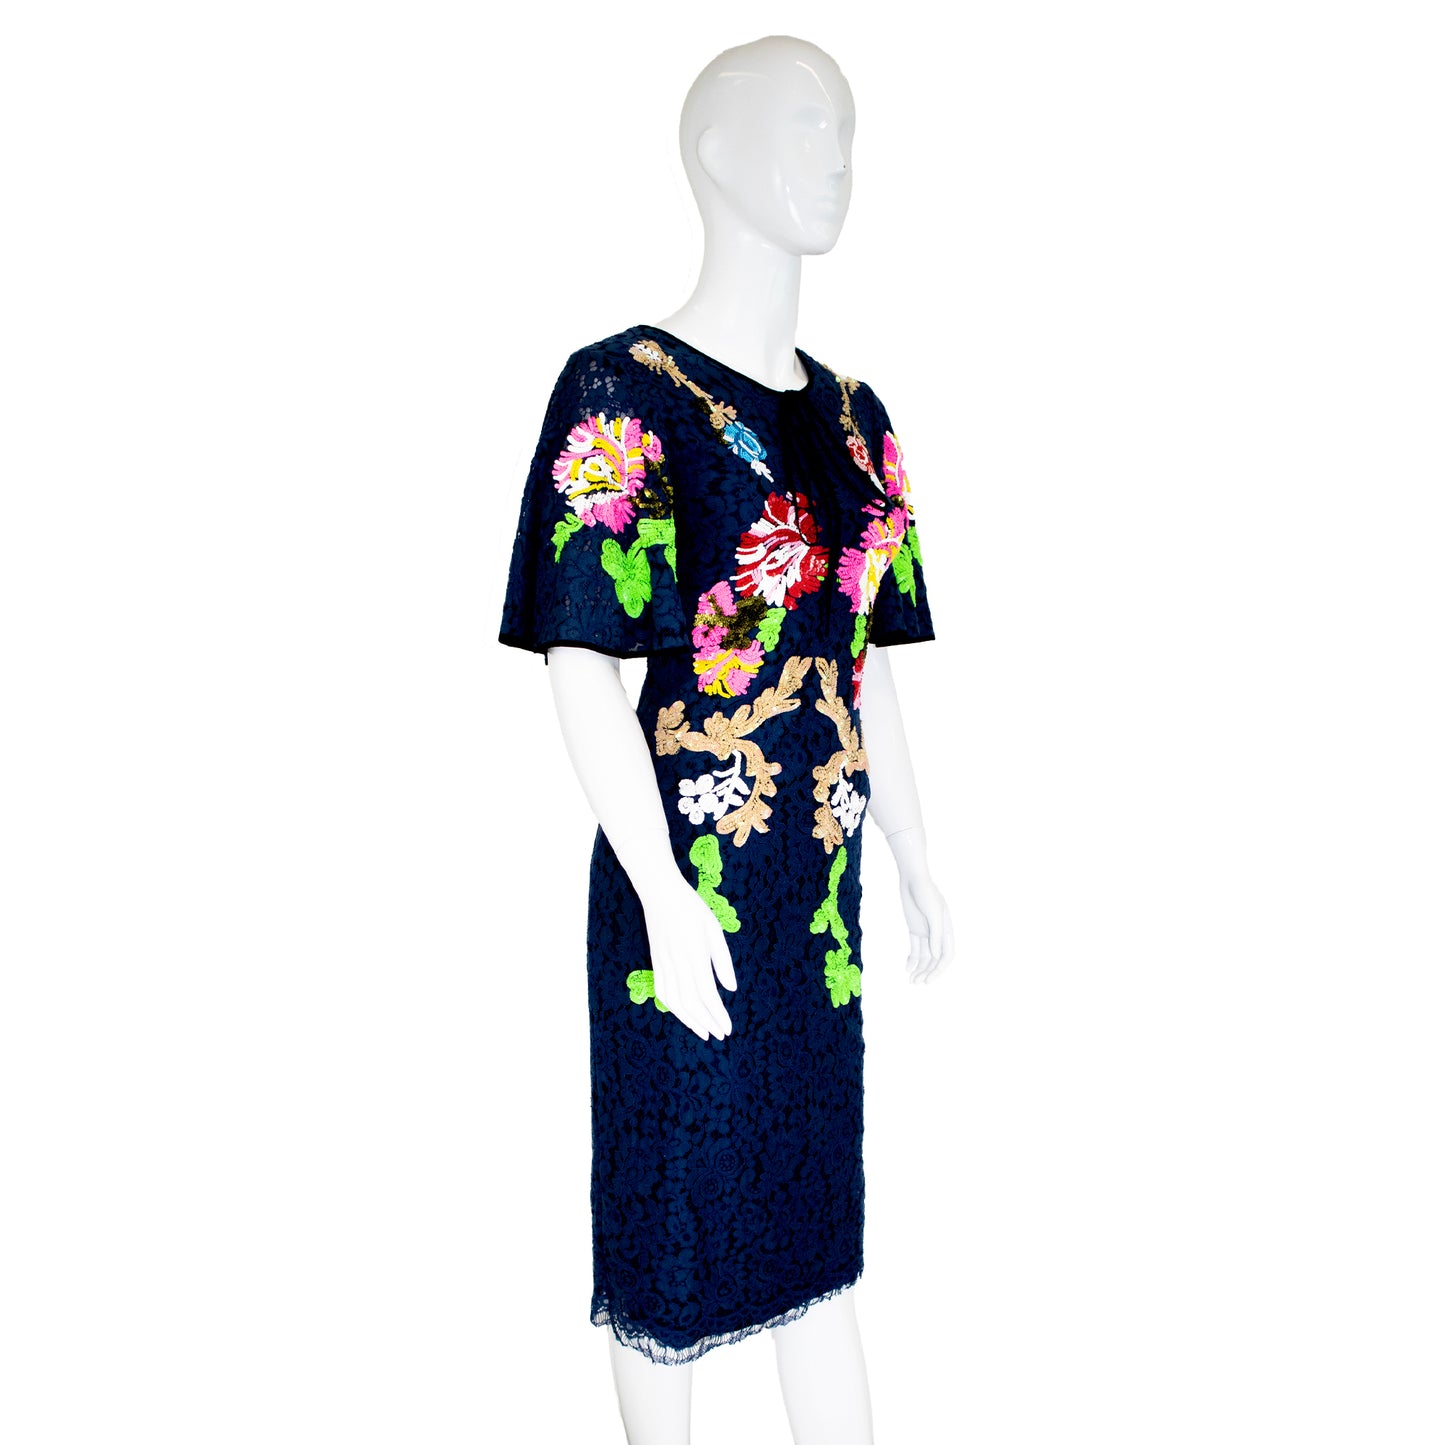 Romance Was Born - Embroidered Dress - Size S